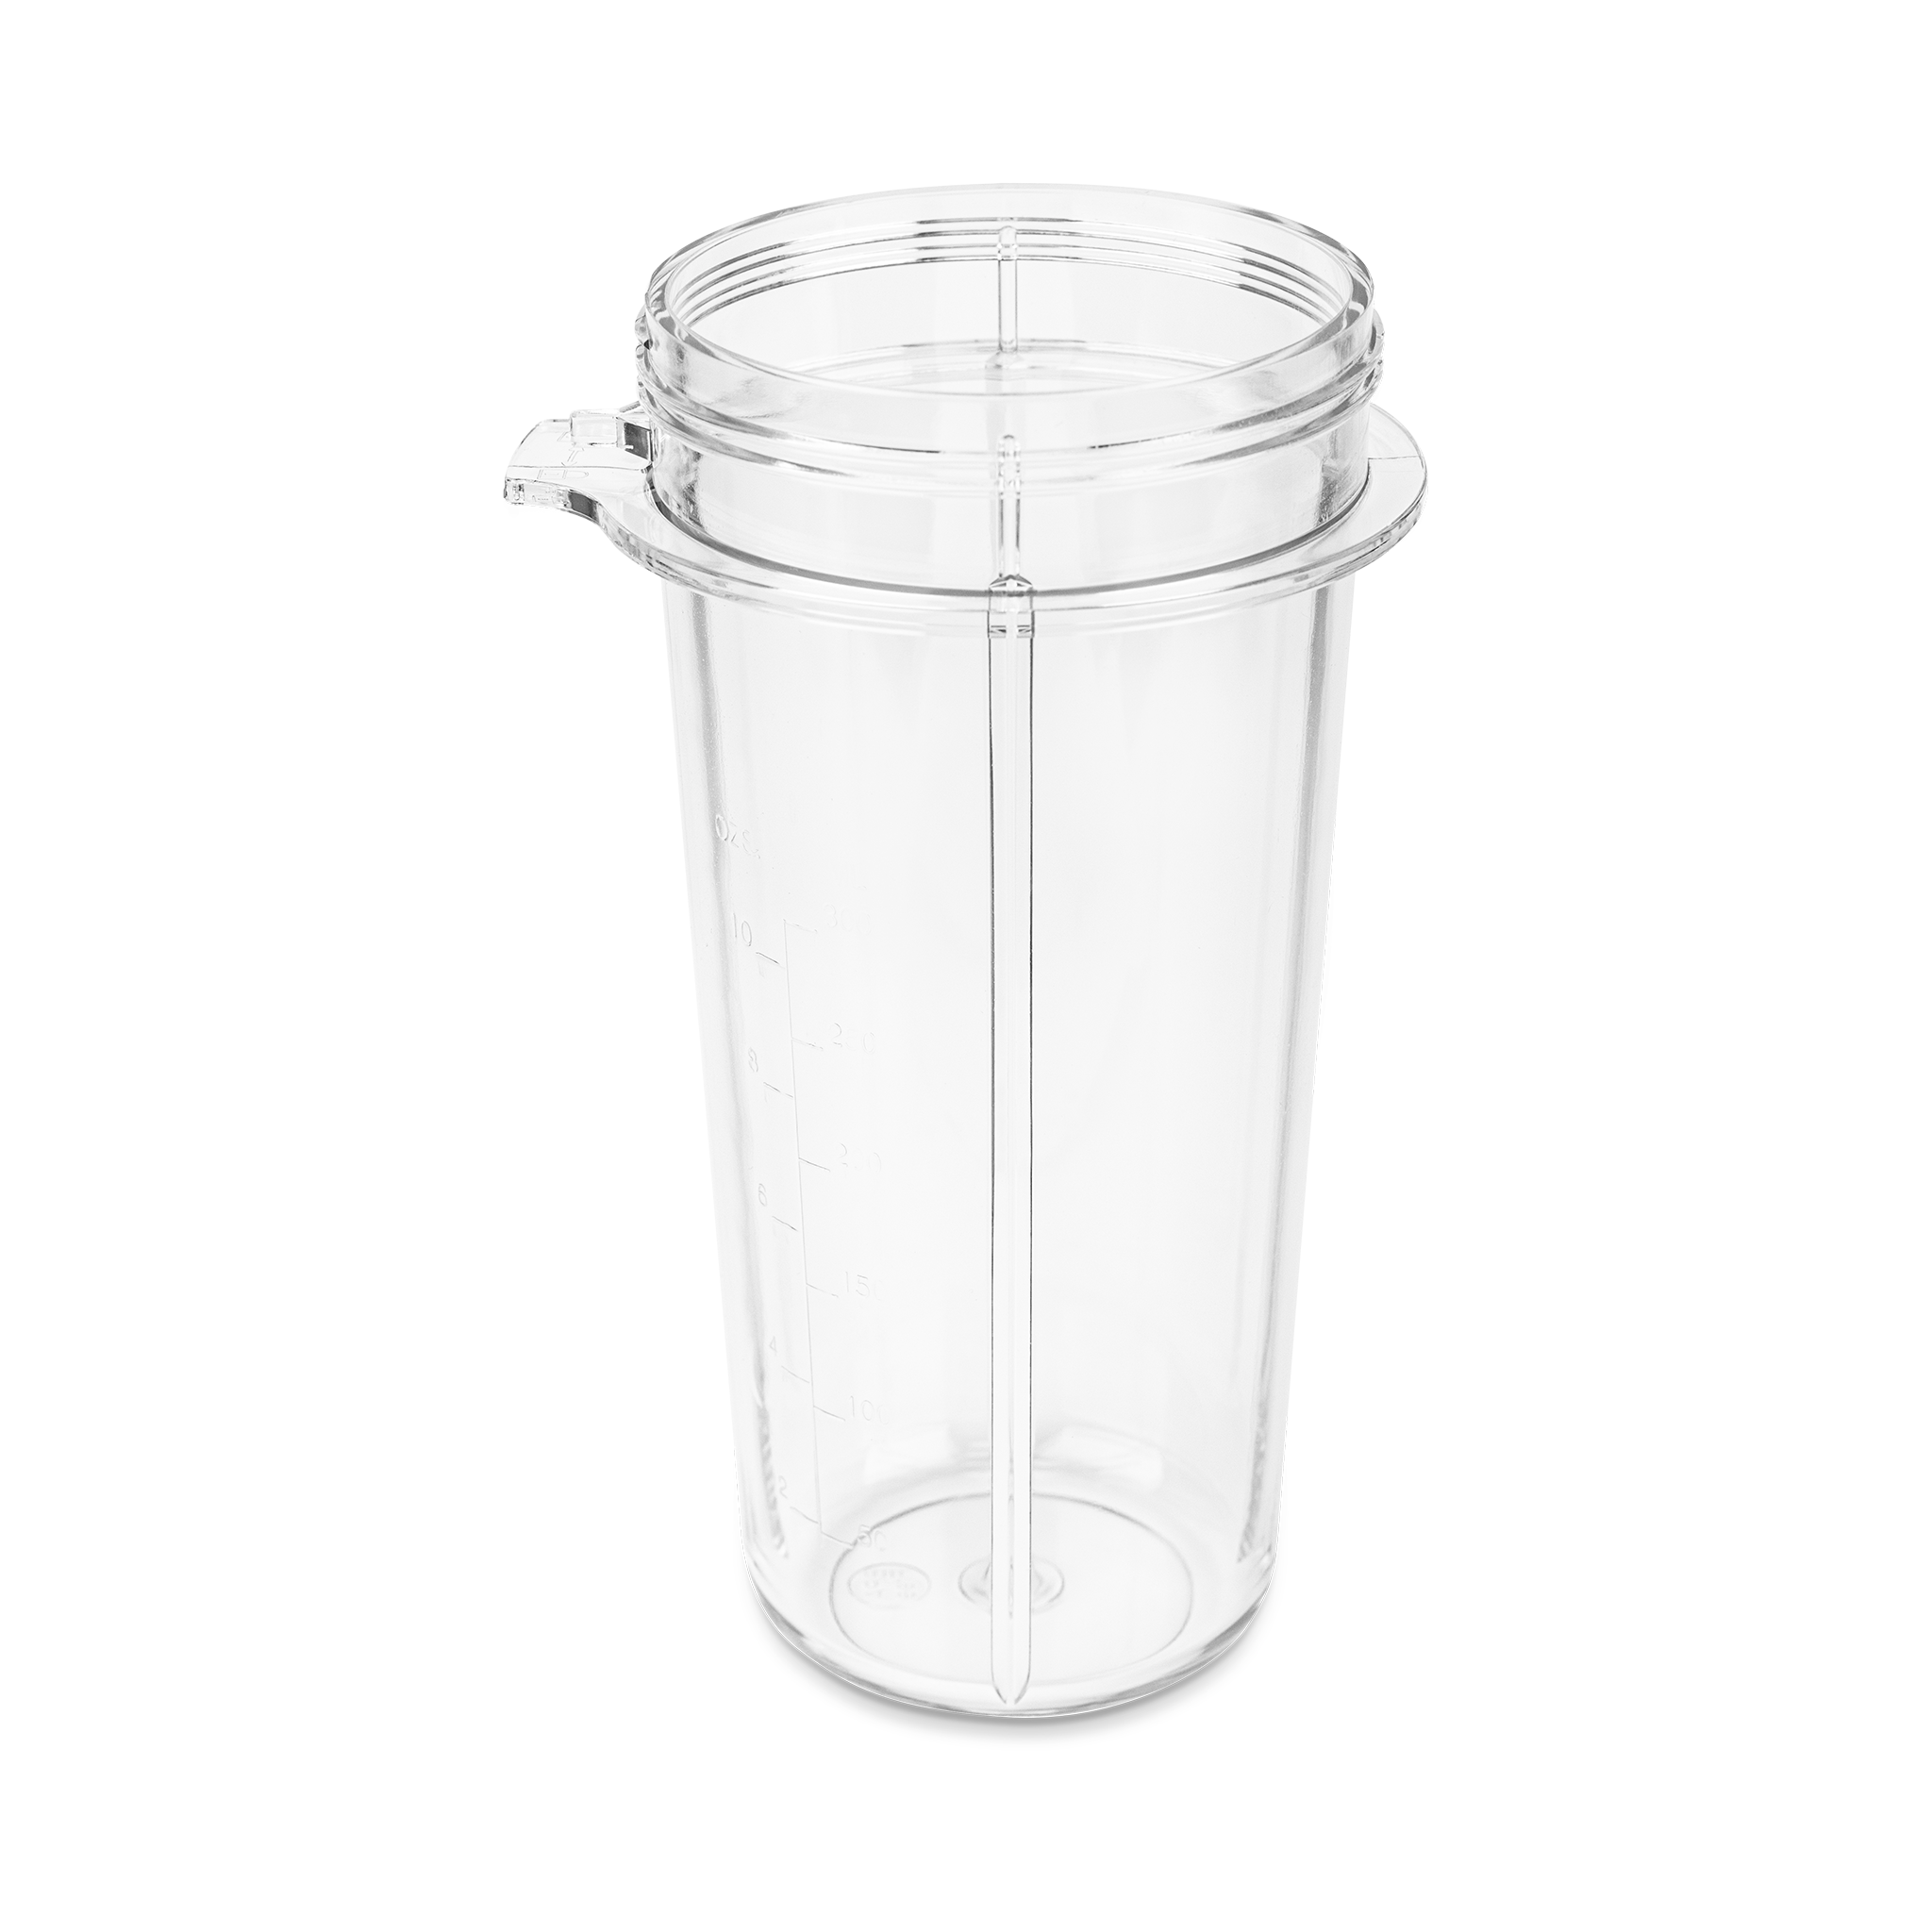 Kitcheniva Personal Blender With Travel Cup And Lid, 1 Pcs - Kroger